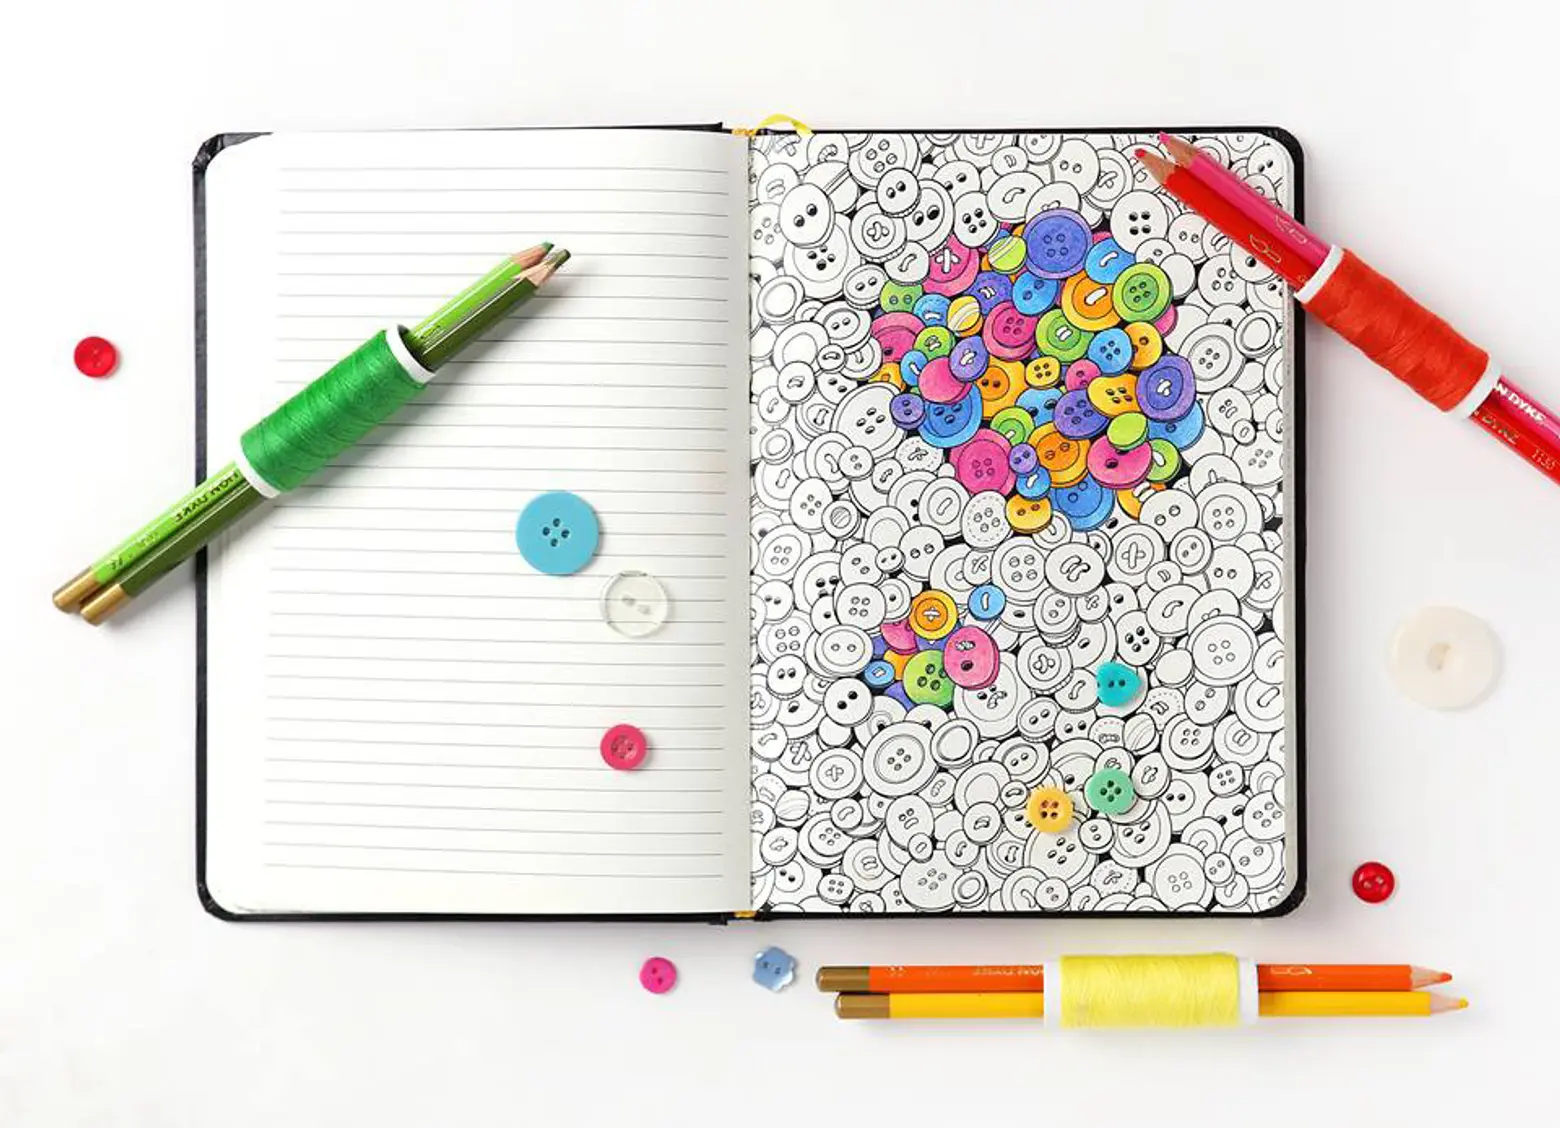 Combine the Joys of an Adult Coloring Book With the Convenience of a Notebook